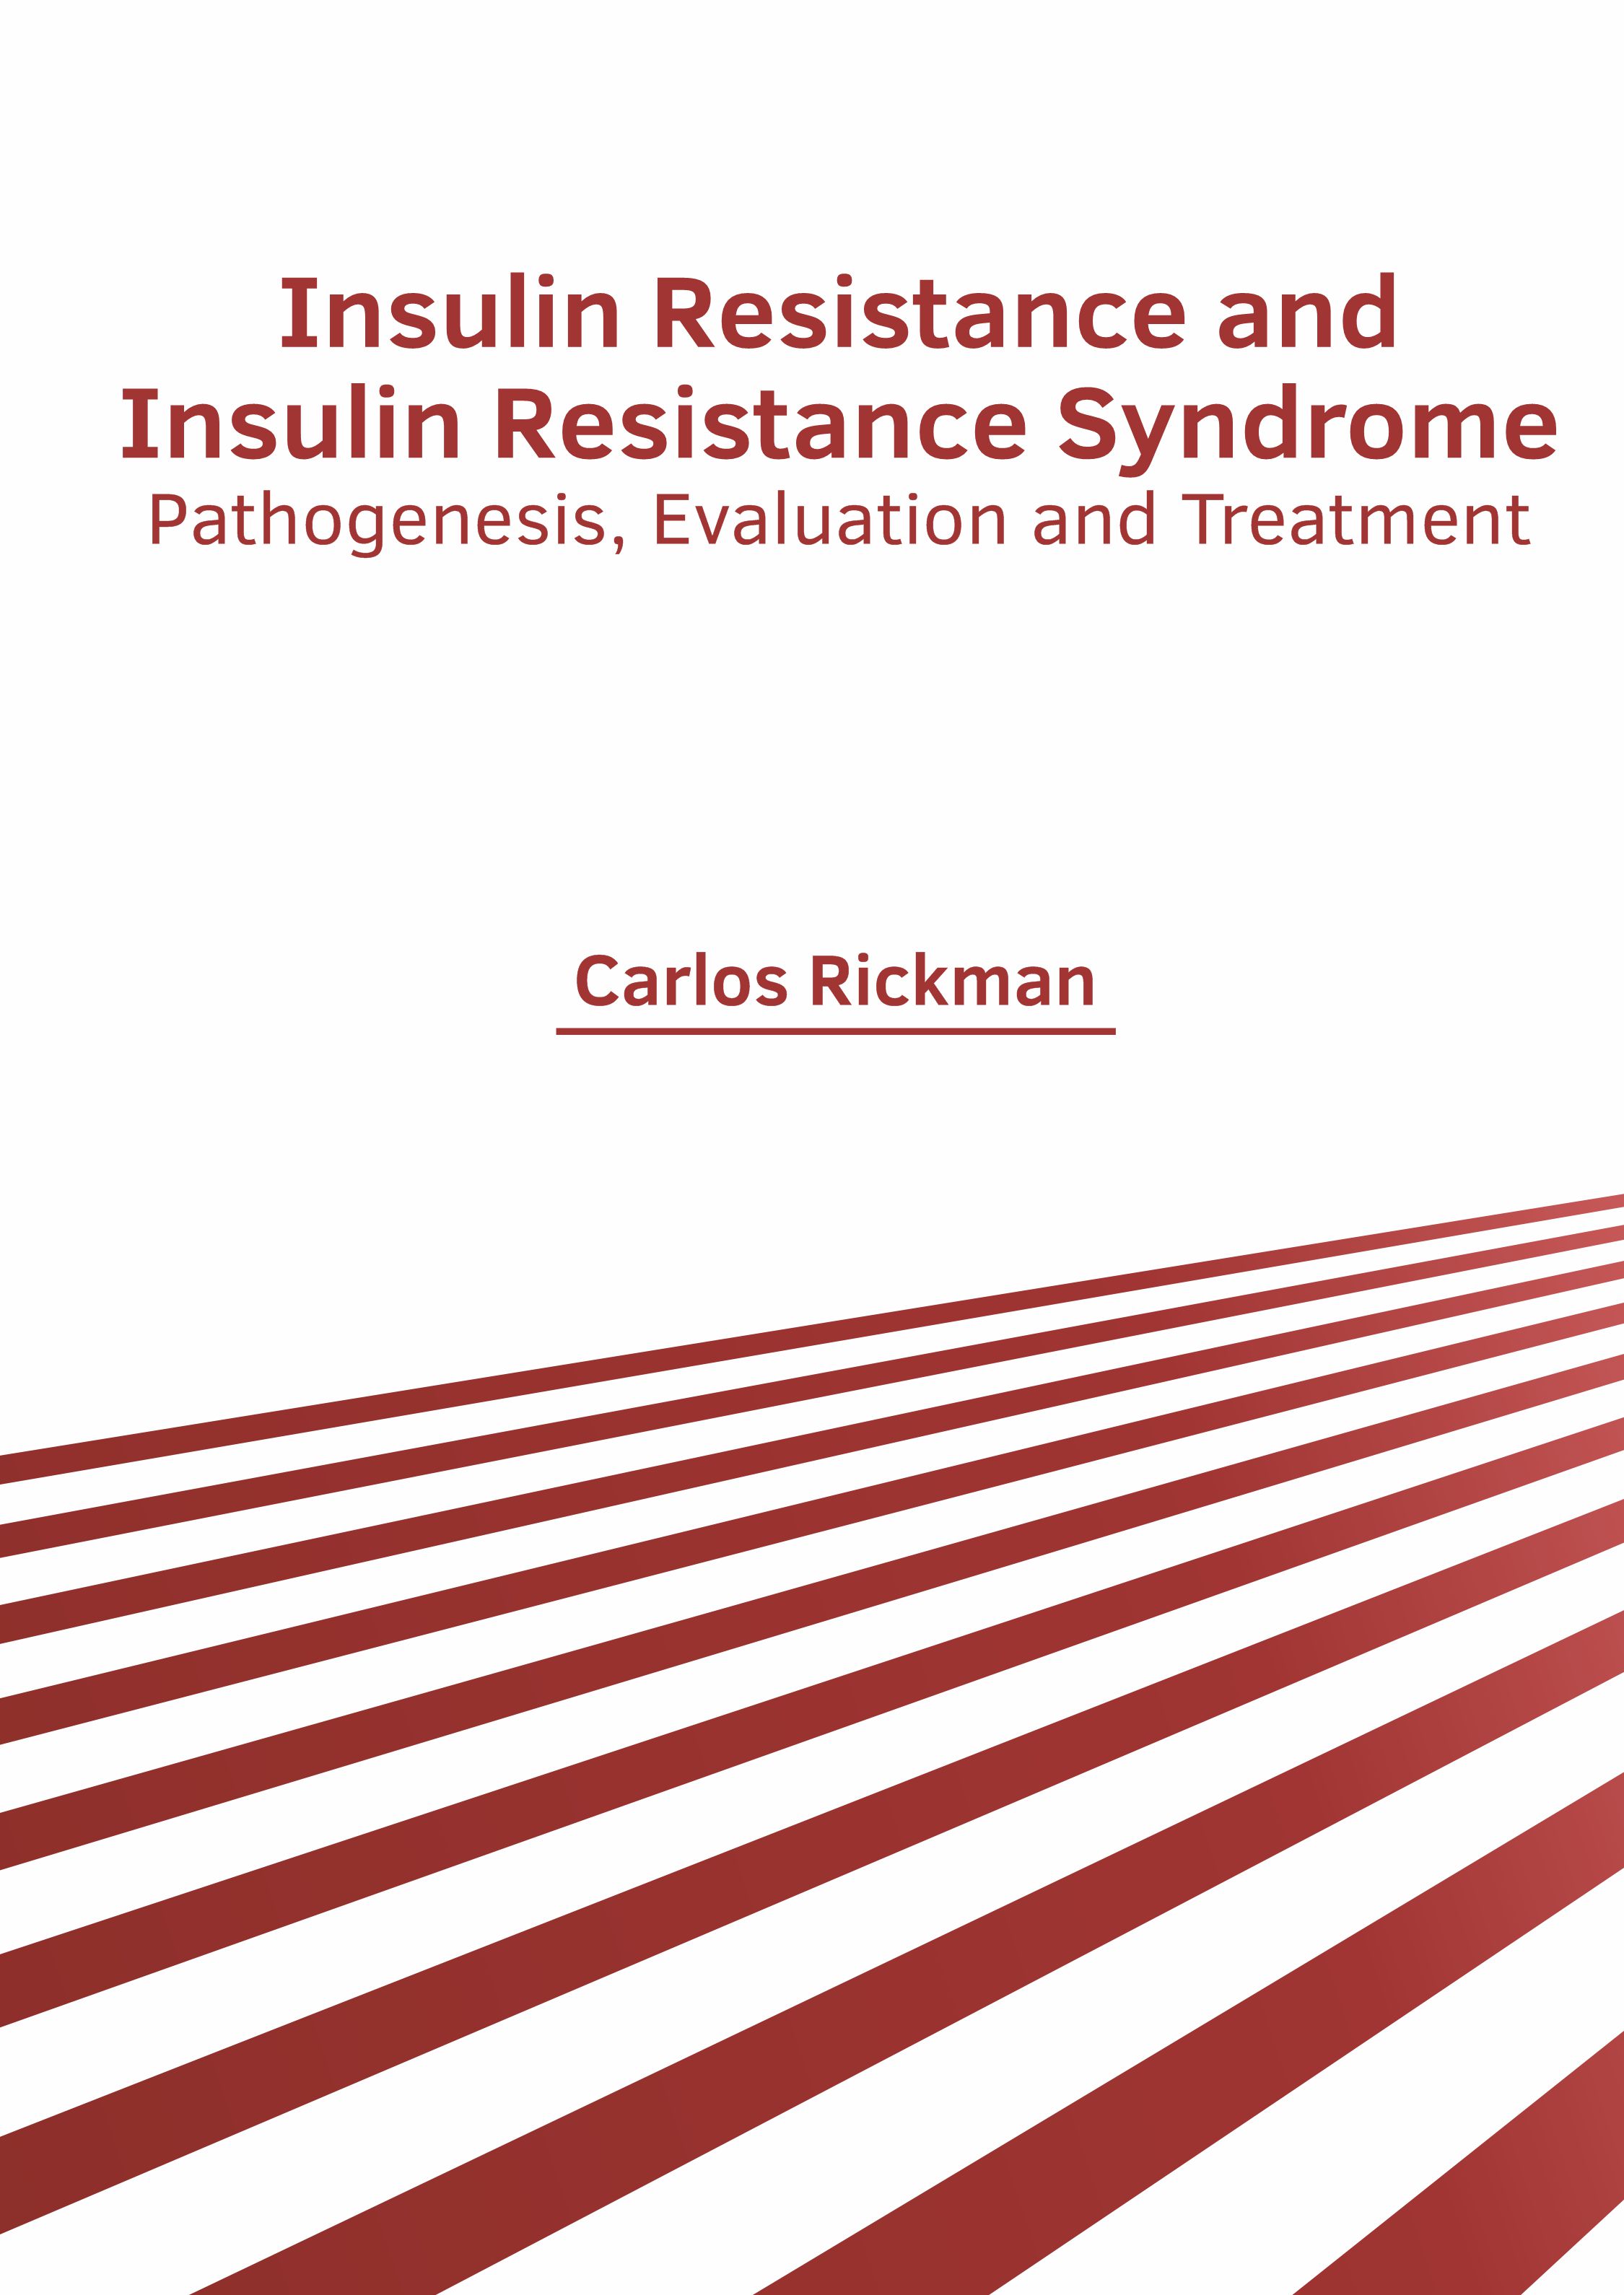 INSULIN RESISTANCE AND INSULIN RESISTANCE SYNDROME: PATHOGENESIS, EVALUATION AND TREATMENT